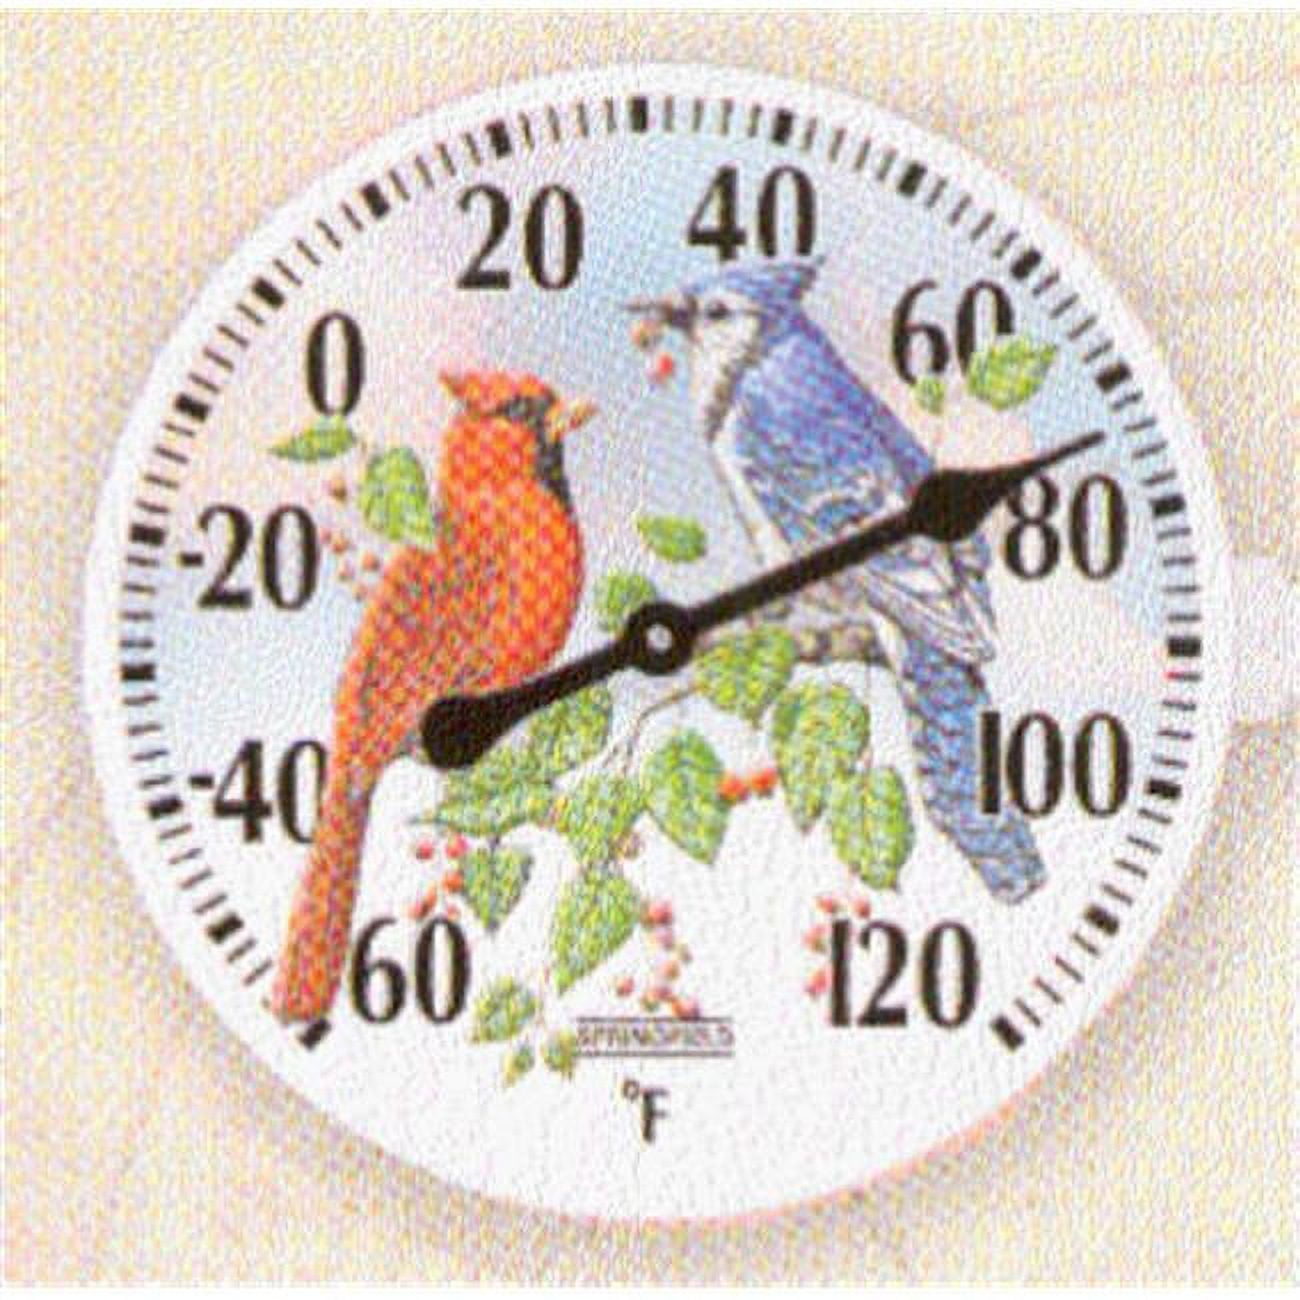 Taylor 13.34 Snowy Cardinal Framed Indoor/Outdoor Thermometer